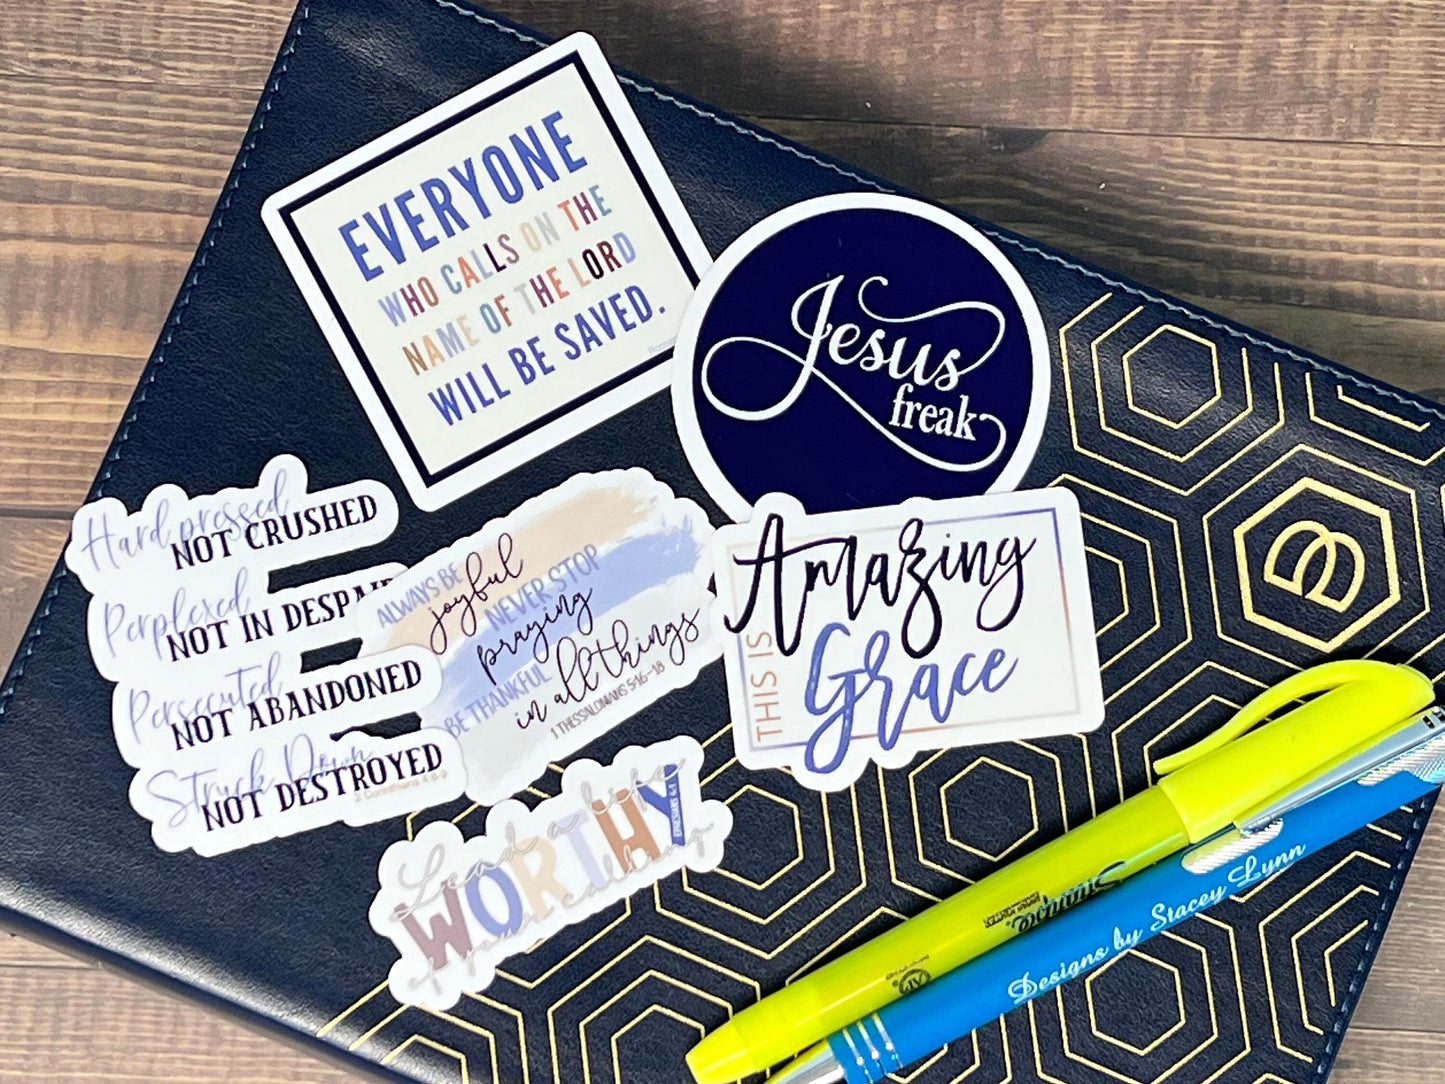 Christian Sticker Pack, Six Faith Stickers, Religious Decals, Bible Verse Stickers, Waterproof Sticker Bundle, Pack 2274